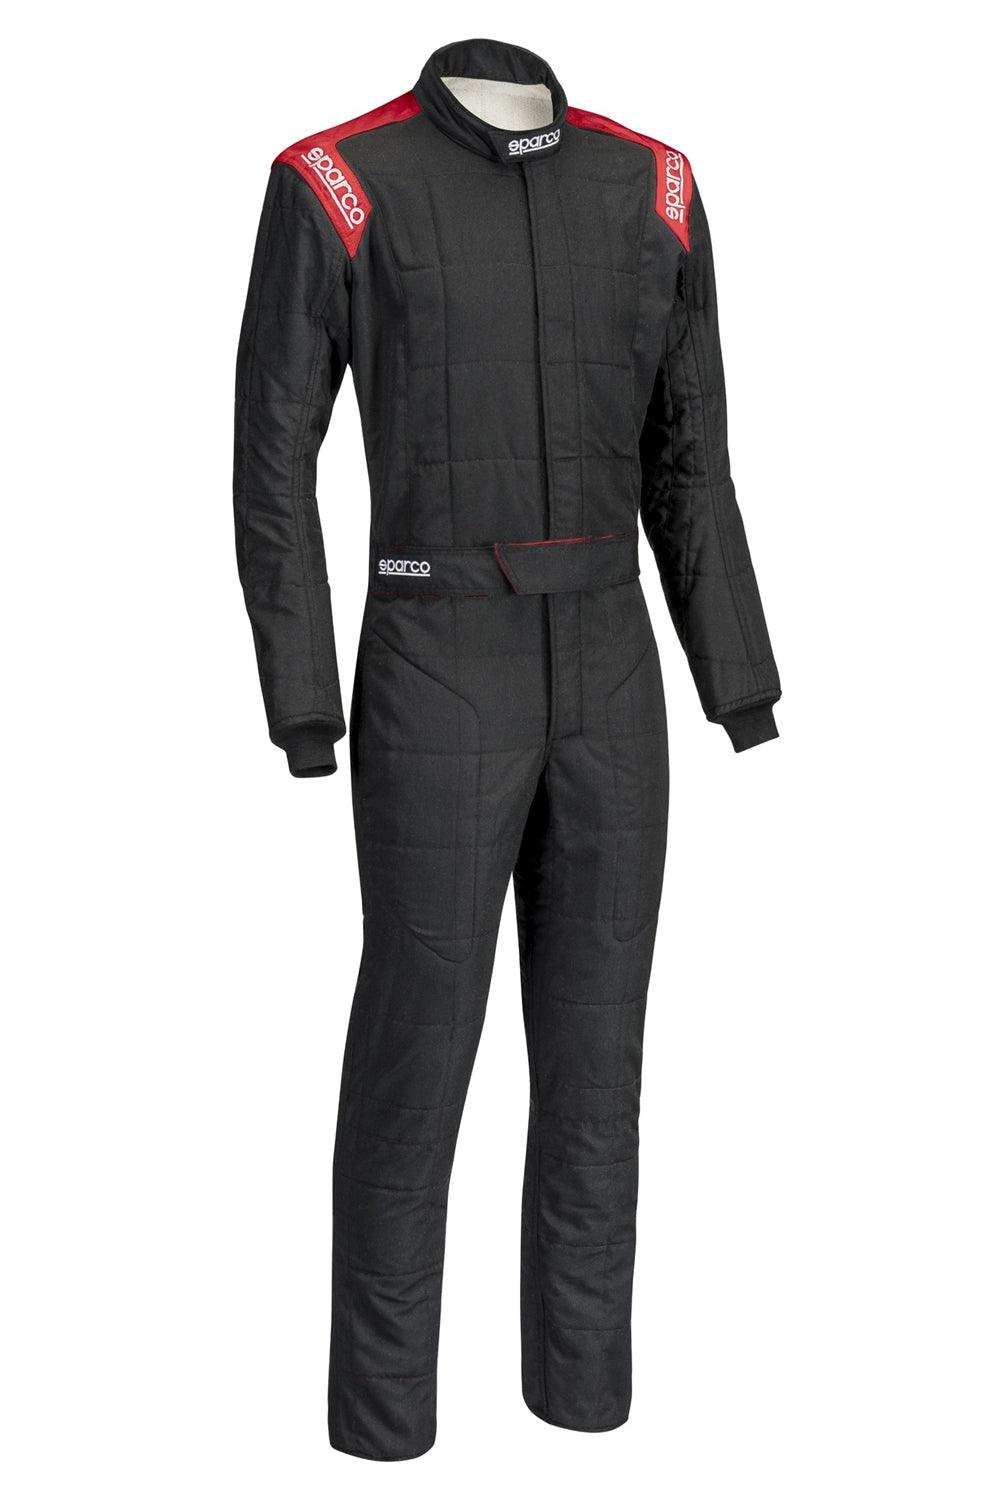 Suit Conquest Boot Cut Blk / Red X-Small - Burlile Performance Products